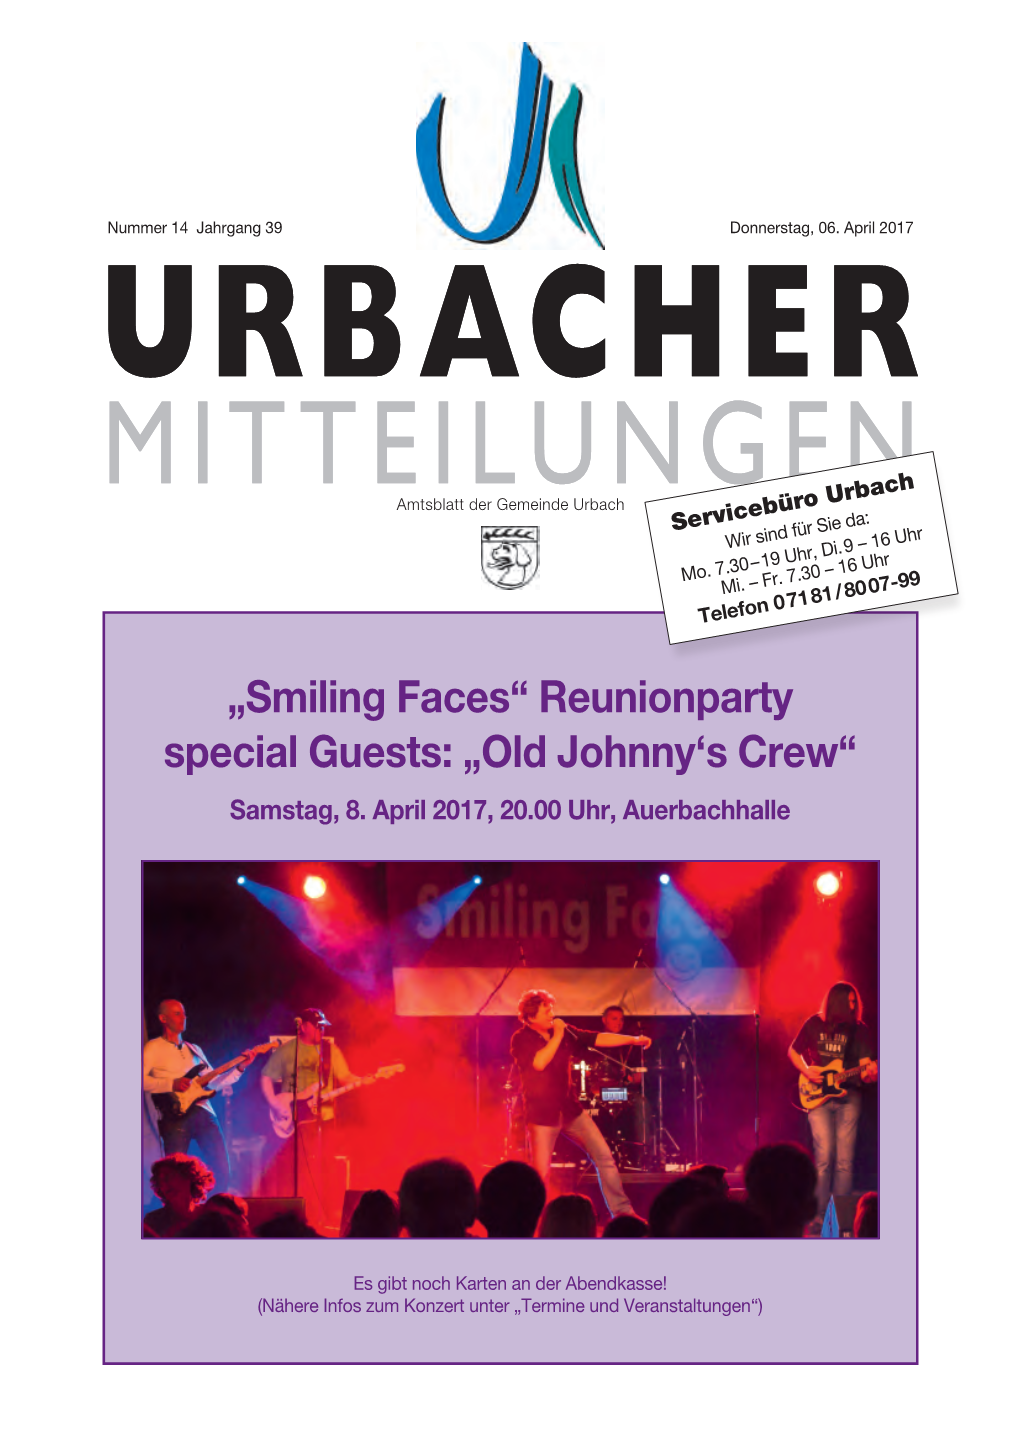 „Smiling Faces“ Reunionparty Special Guests: „Old Johnny‘S Crew“ Samstag, 8